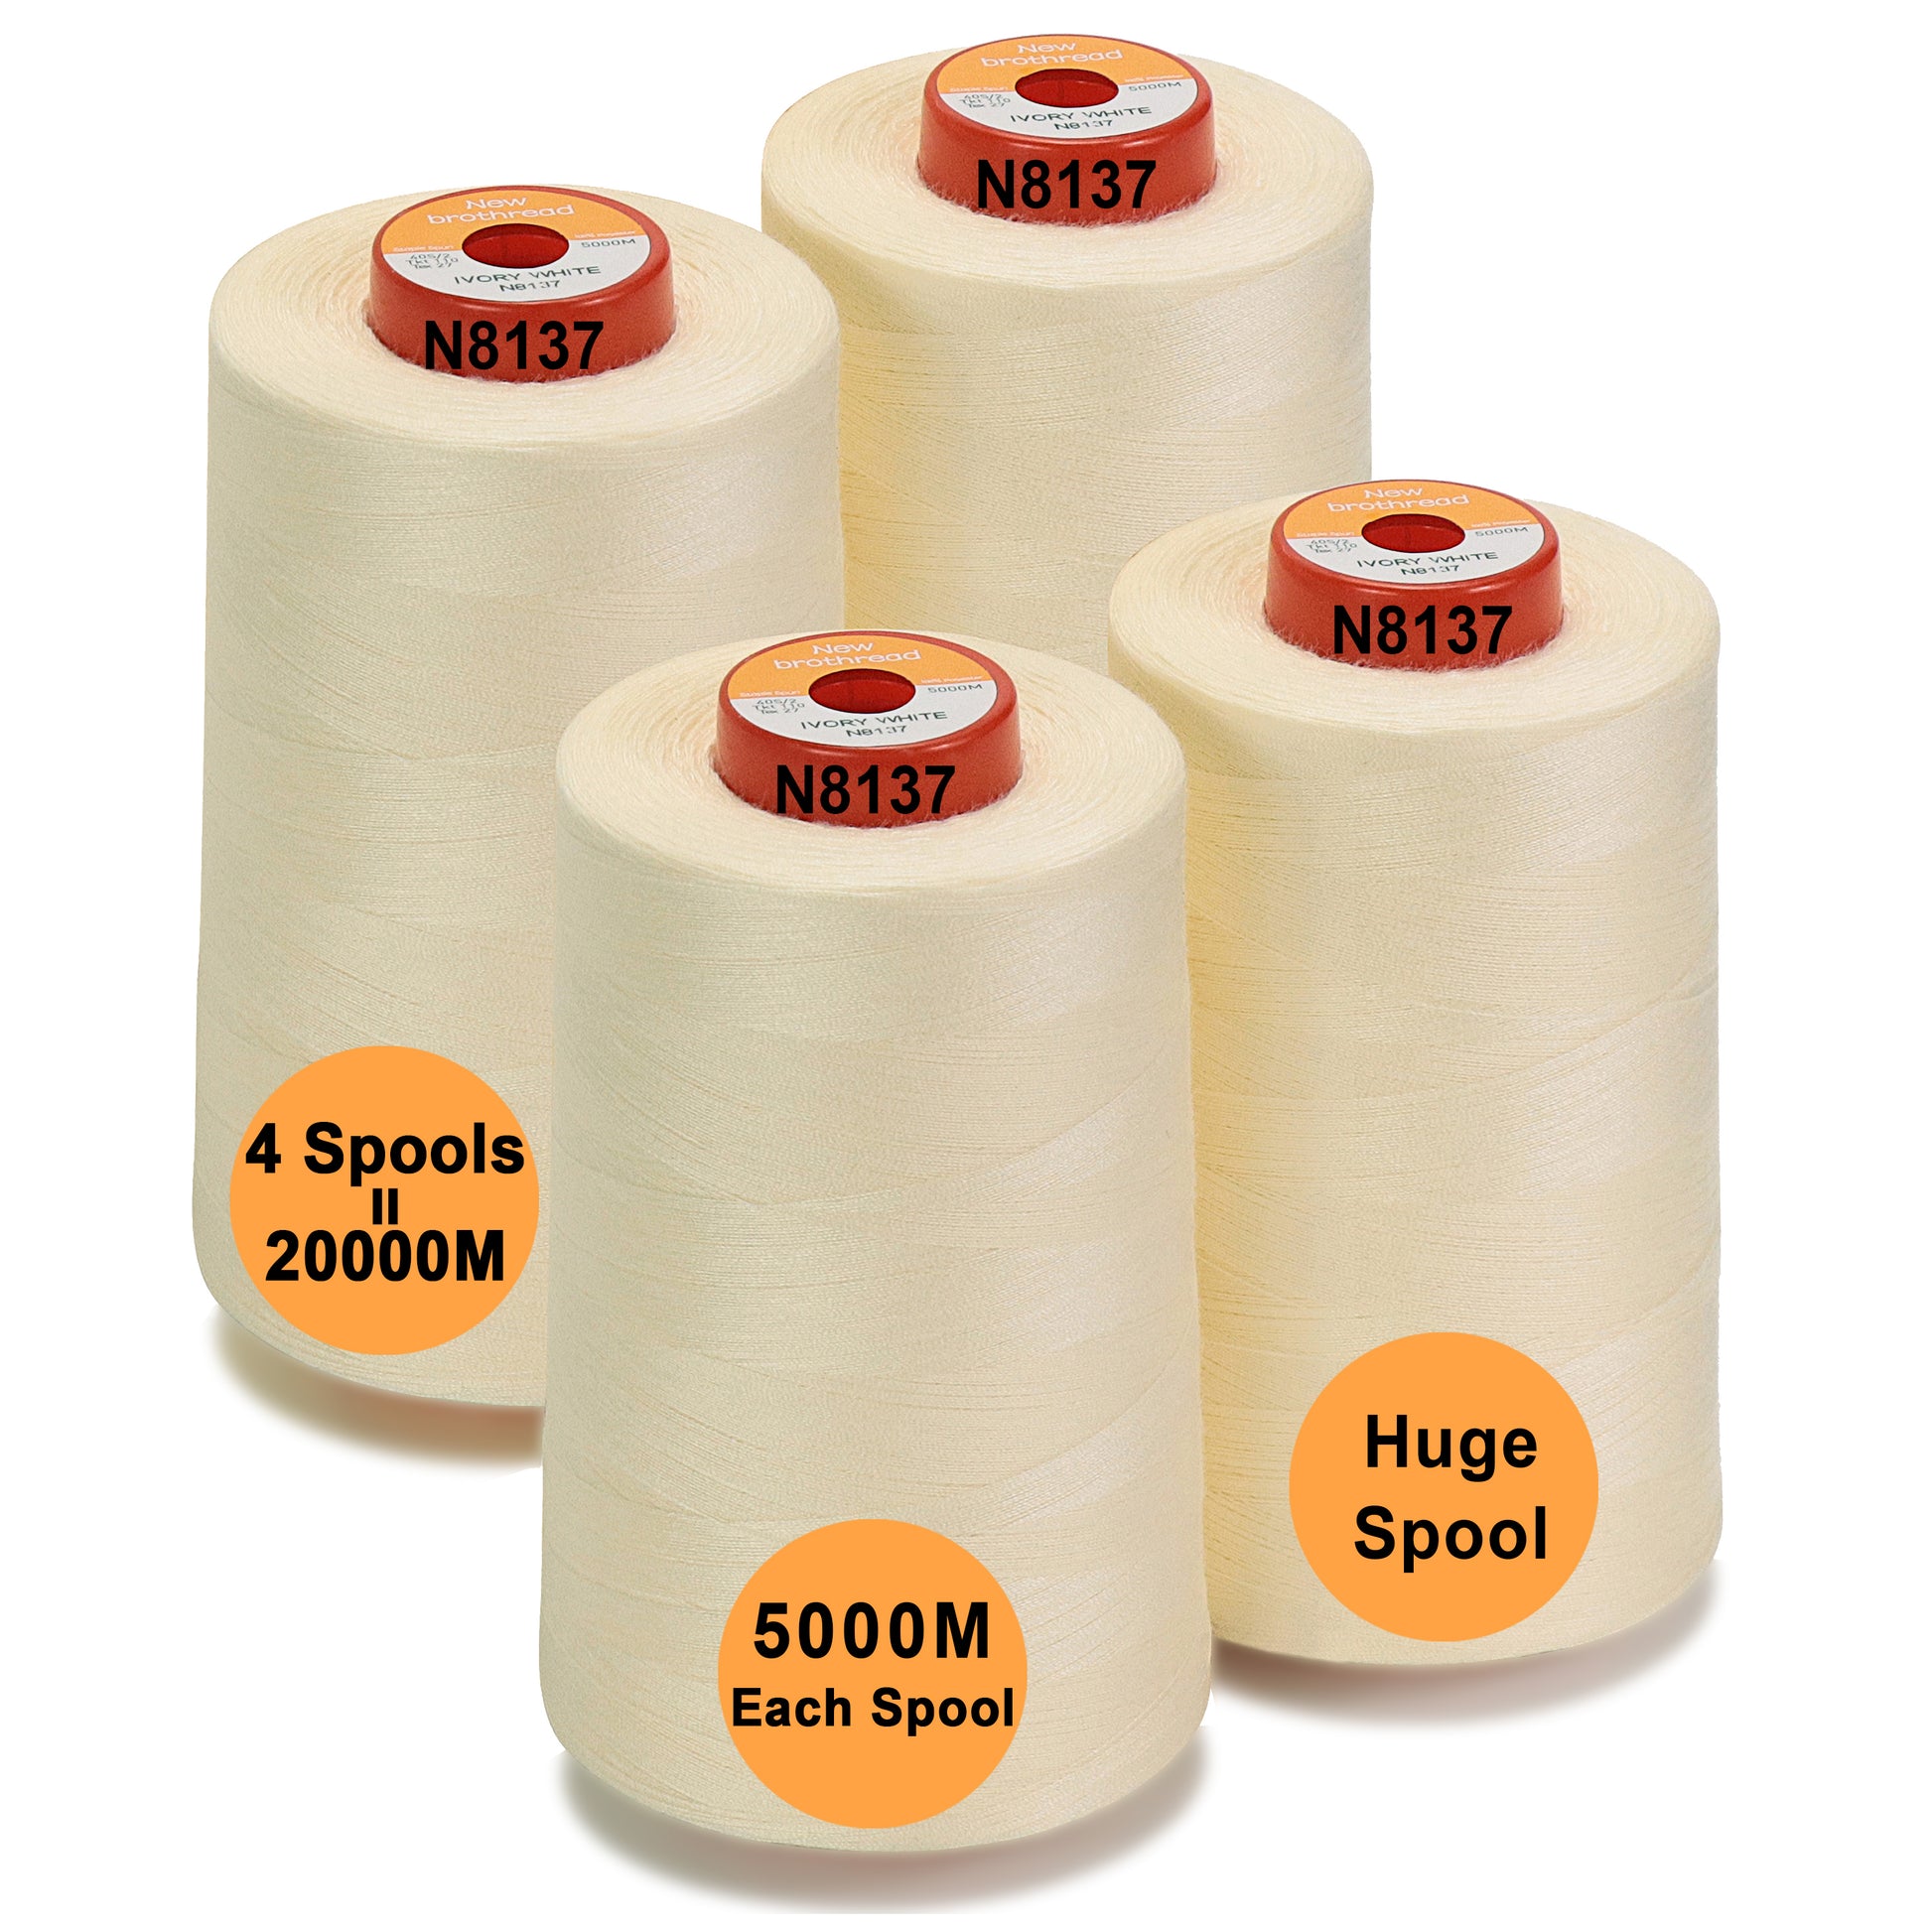 New brothread Set of 2 White Bobbin Thread/Bottom Thread 60WT Huge Spool  5000M (5500Y) for Embroidery and Sewing Machines